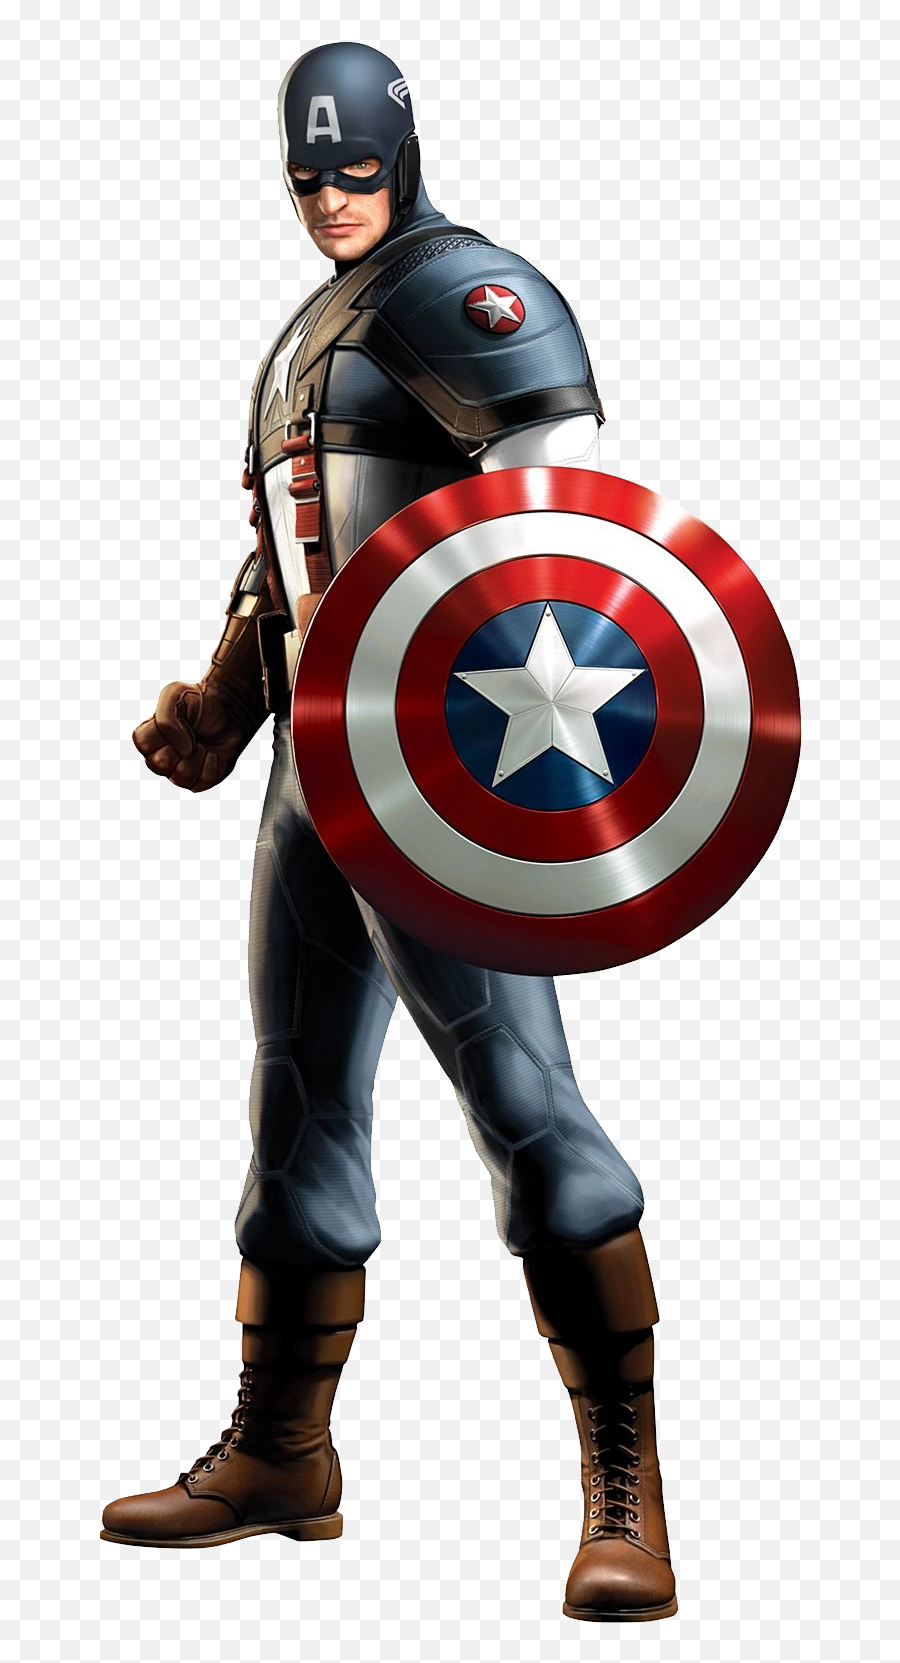 Captain America Png Image For Free Download - Transparent Background Captain America Png,Captain America Logo Png